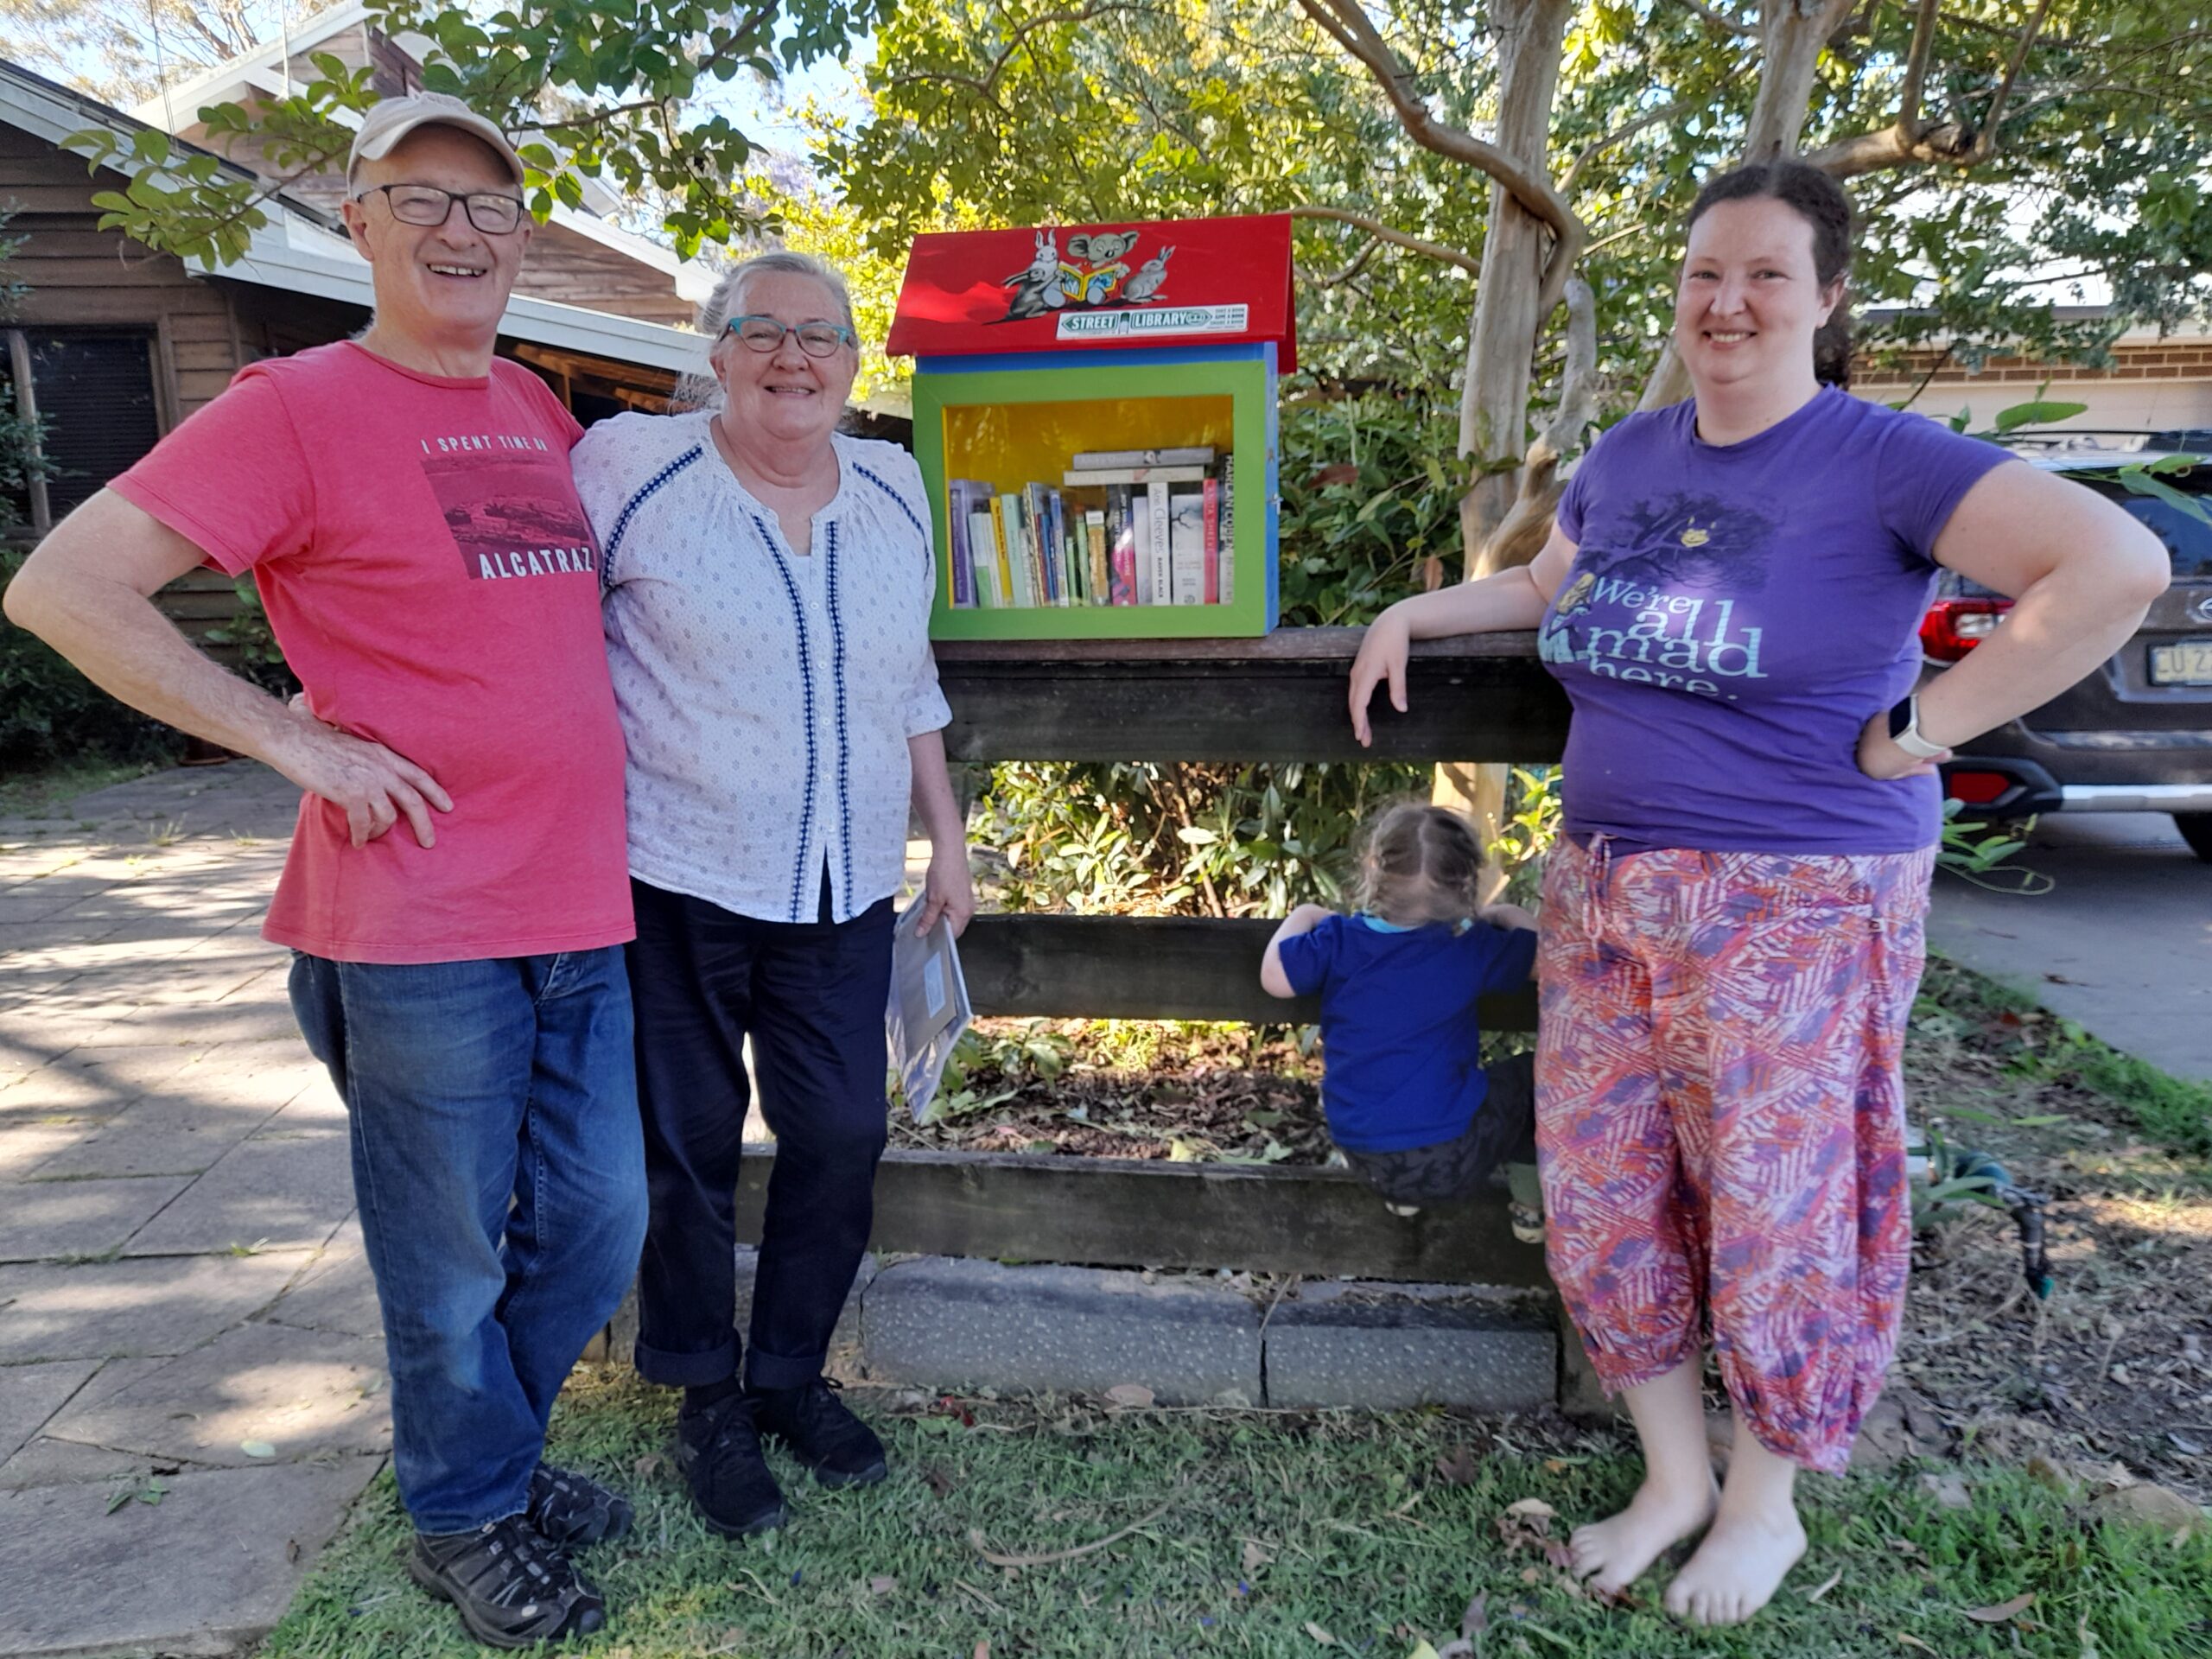 Members of the community with their Street Library